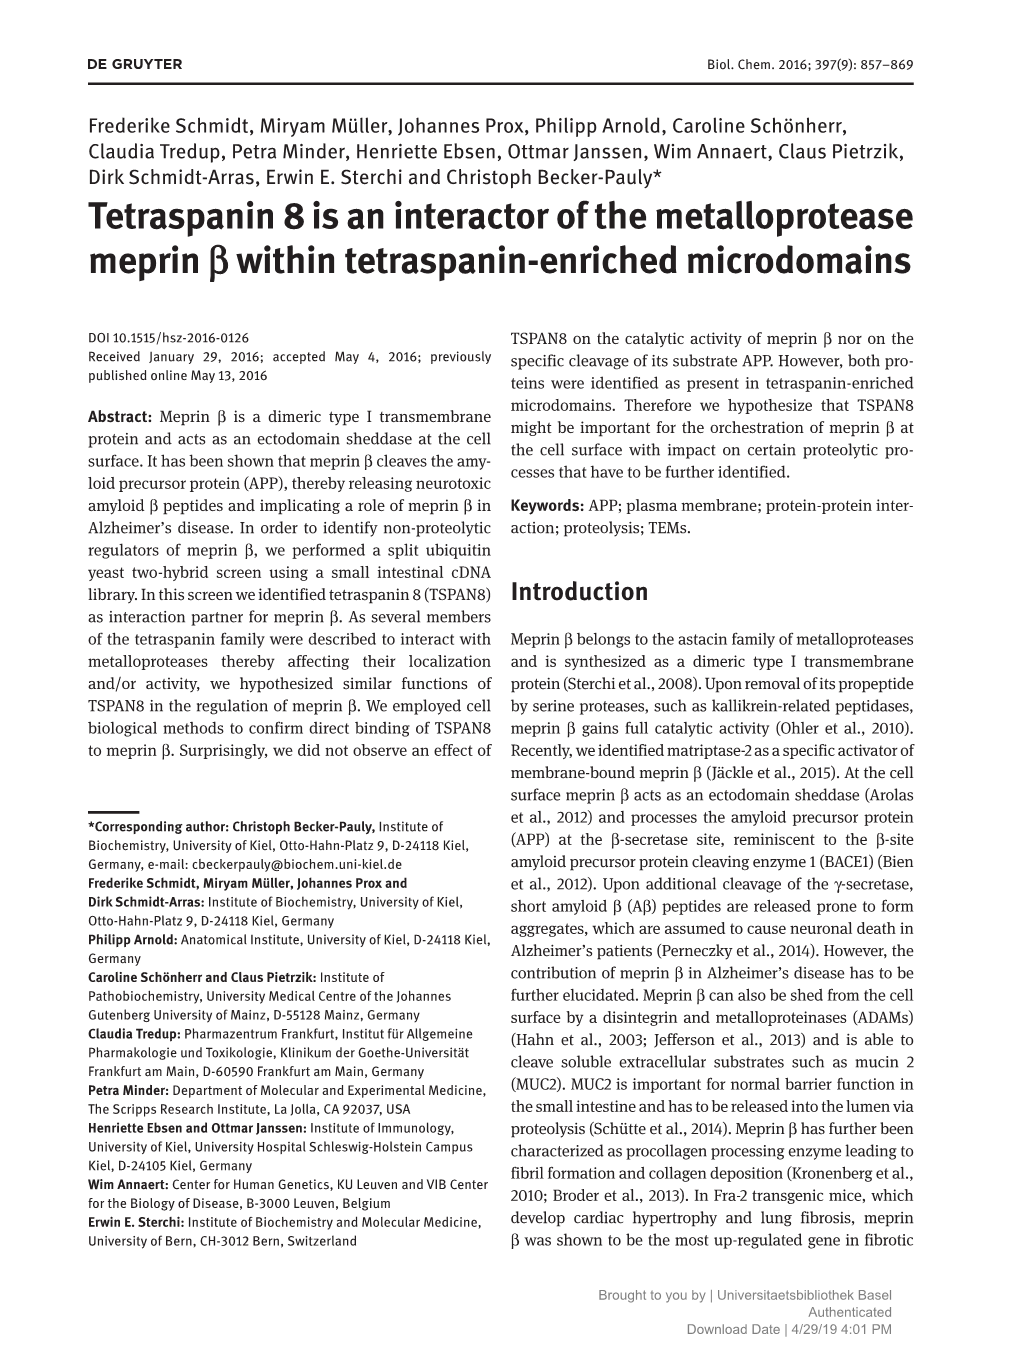 Tetraspanin 8 Is an Interactor of the Metalloprotease Meprin Β Within Tetraspanin-Enriched Microdomains